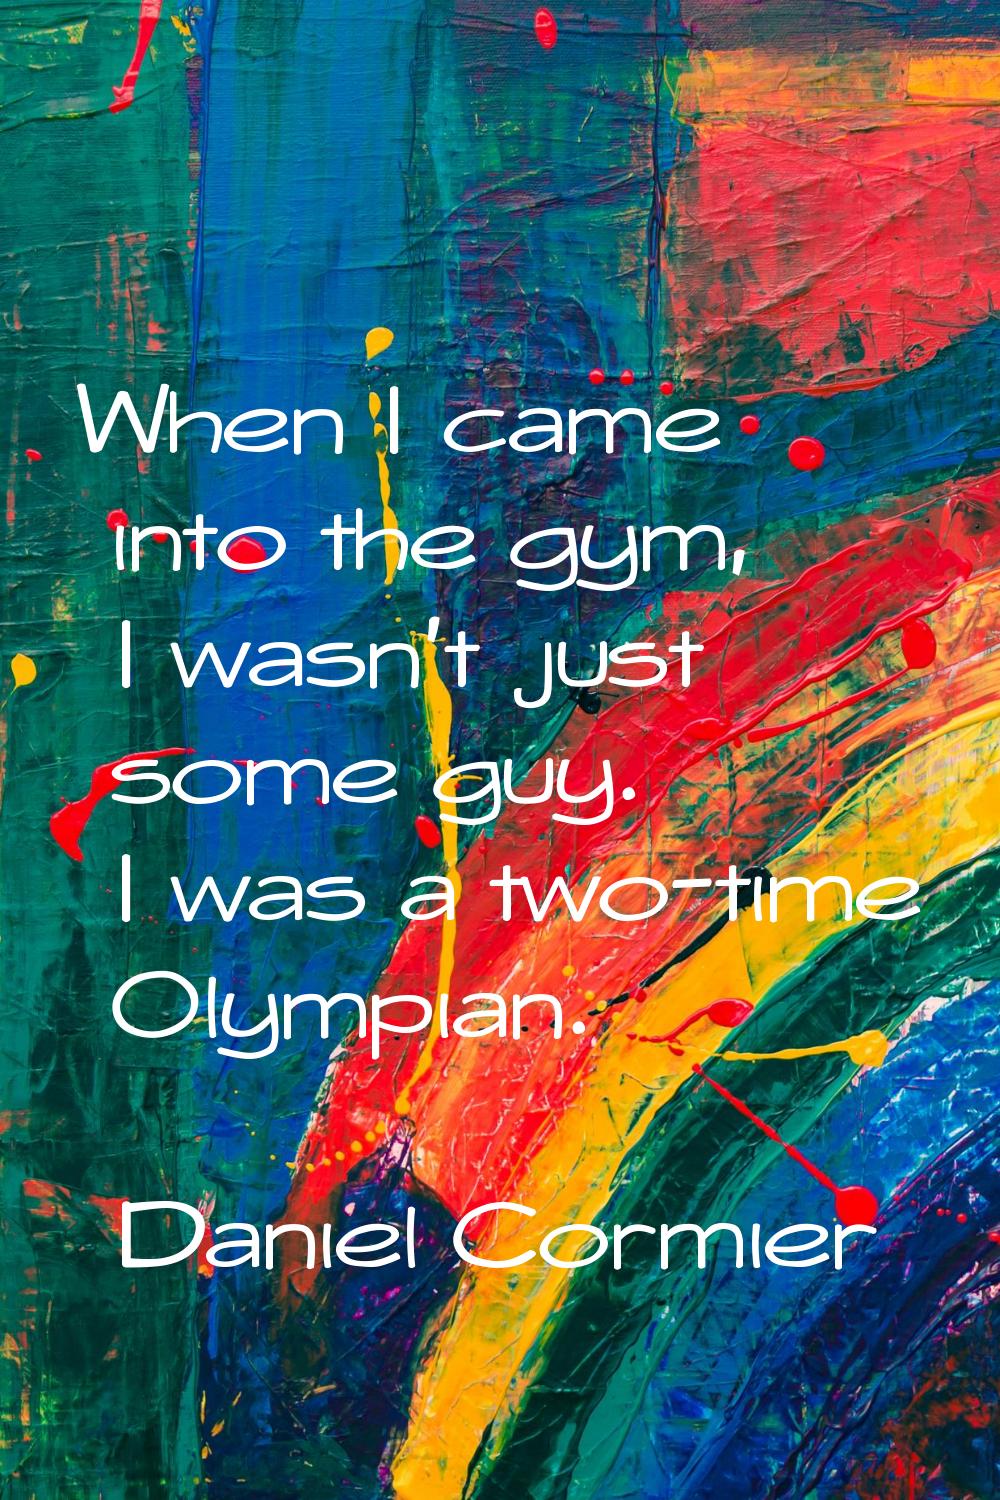 When I came into the gym, I wasn't just some guy. I was a two-time Olympian.